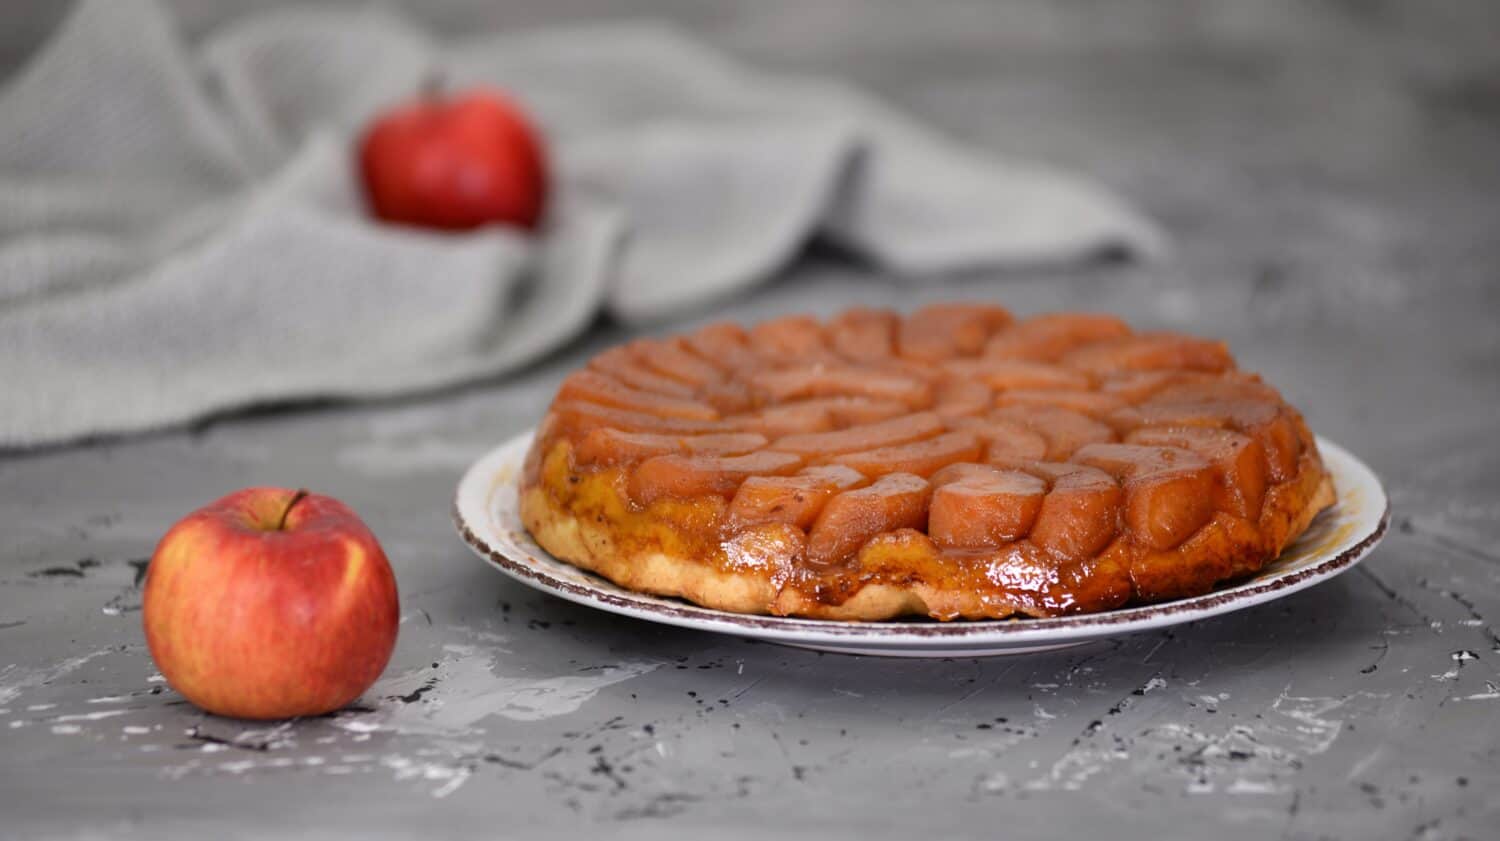 Traditional French Tarte Tatin with caramelized apples and crust pastry